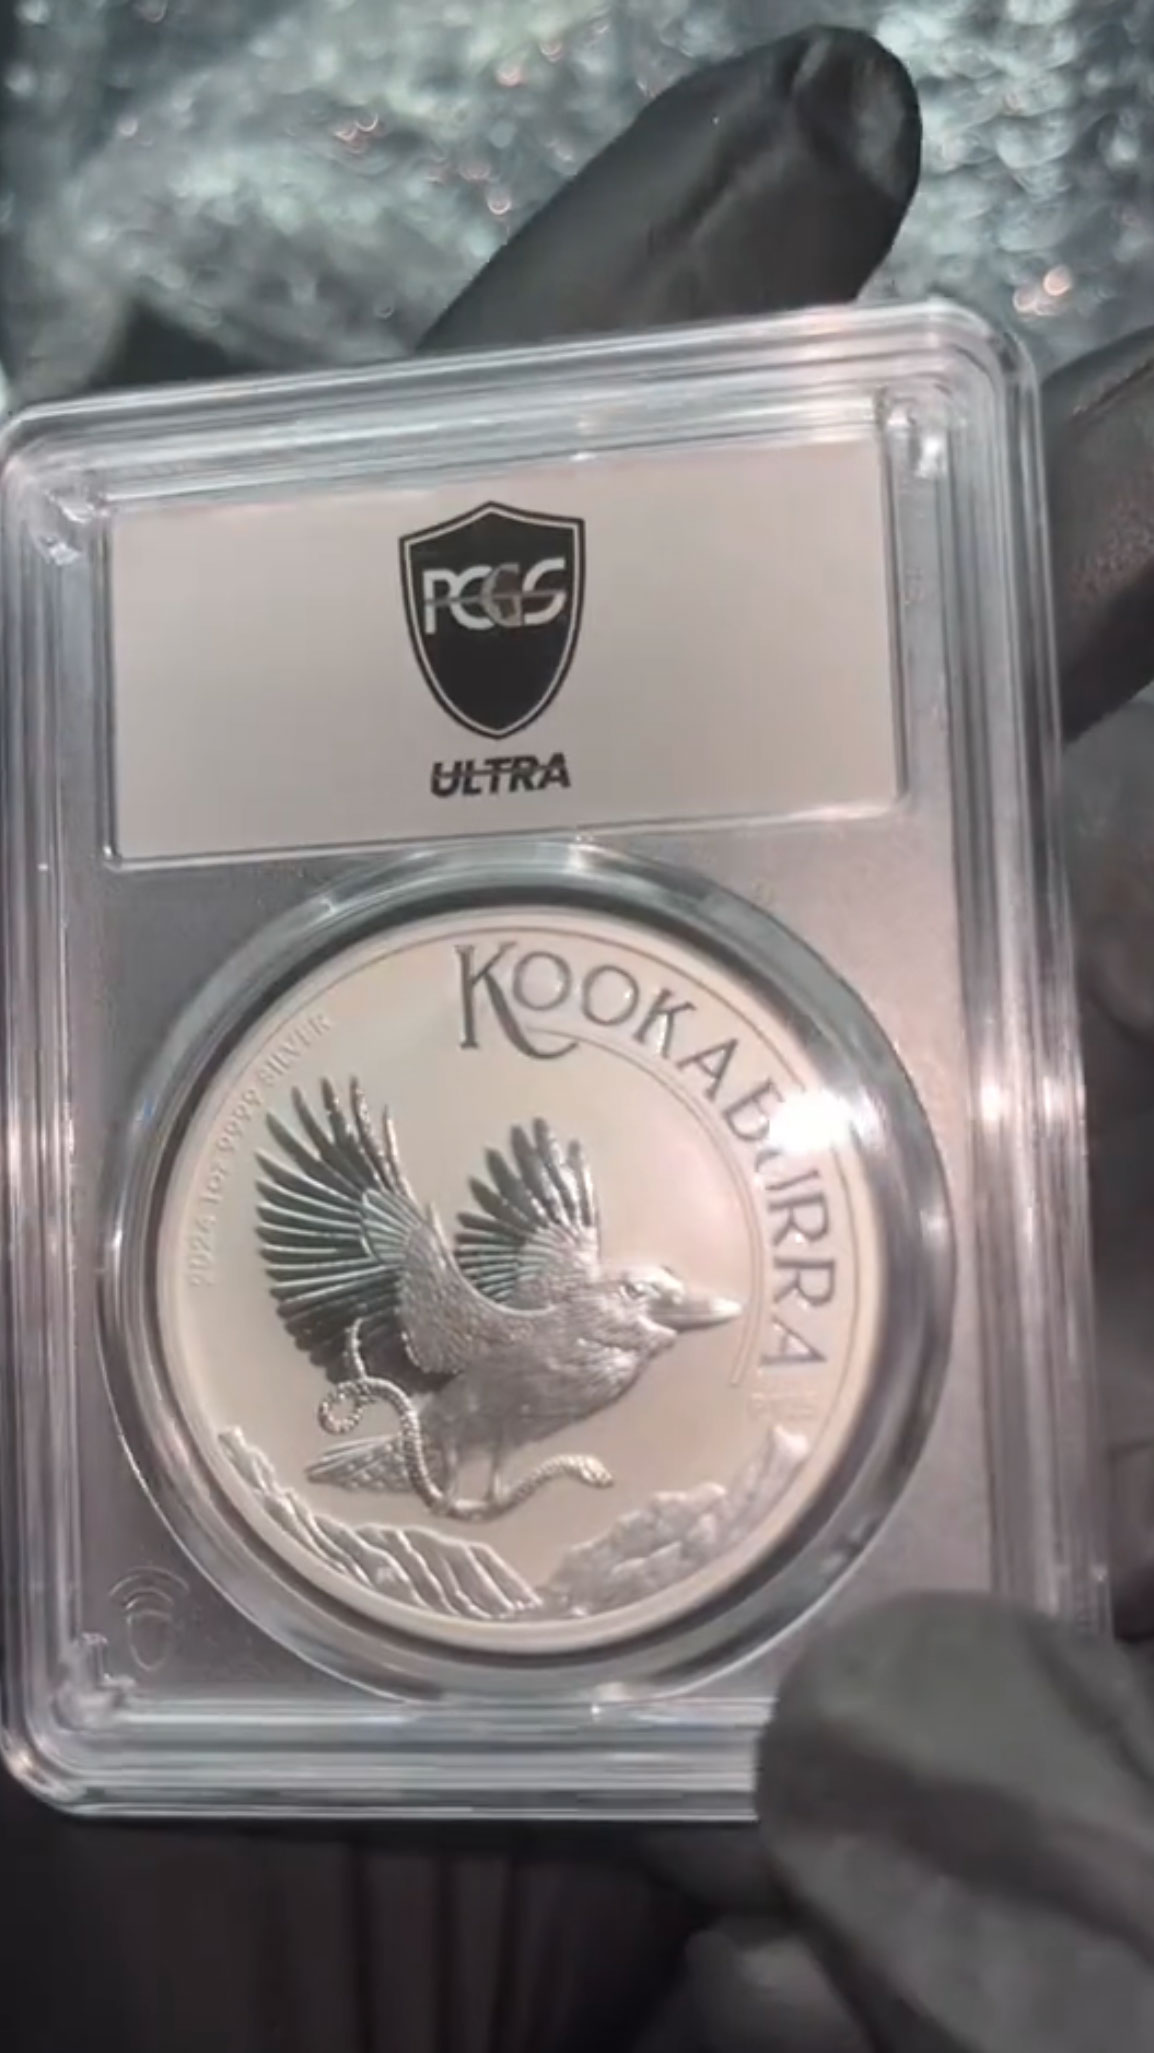 The Kookaburra coin was made of silver